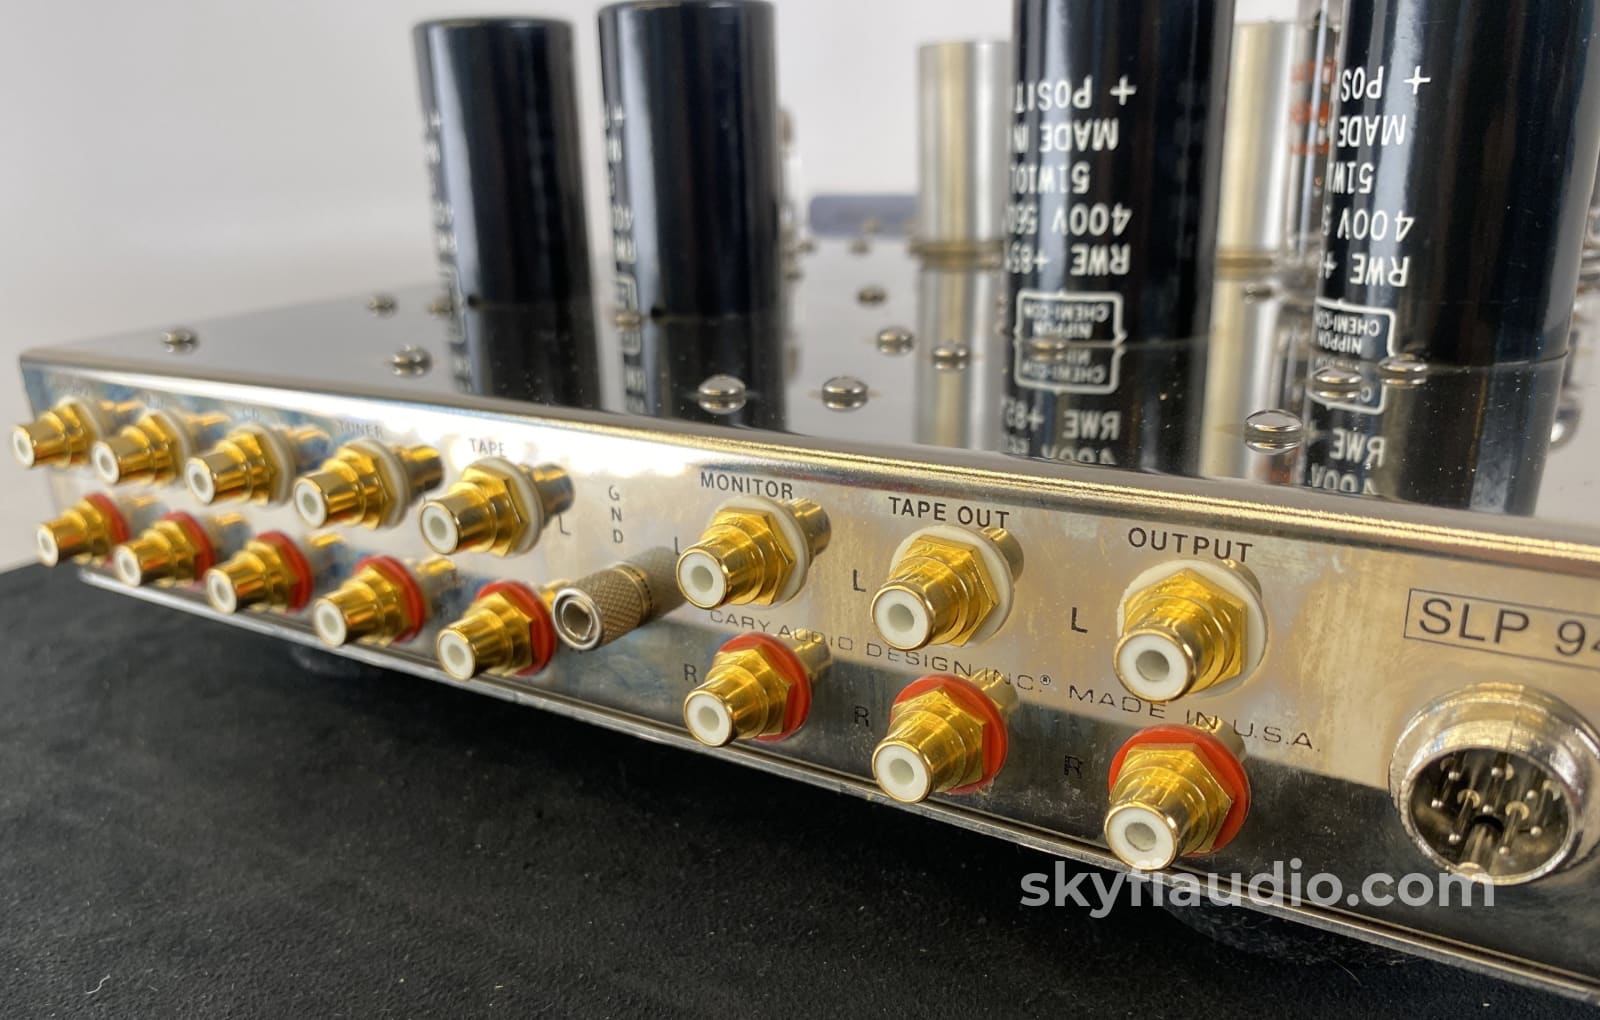 Cary Audio Slp-94 Tube Preamp W/Phono Stage And Separate Power Supply Amplifier